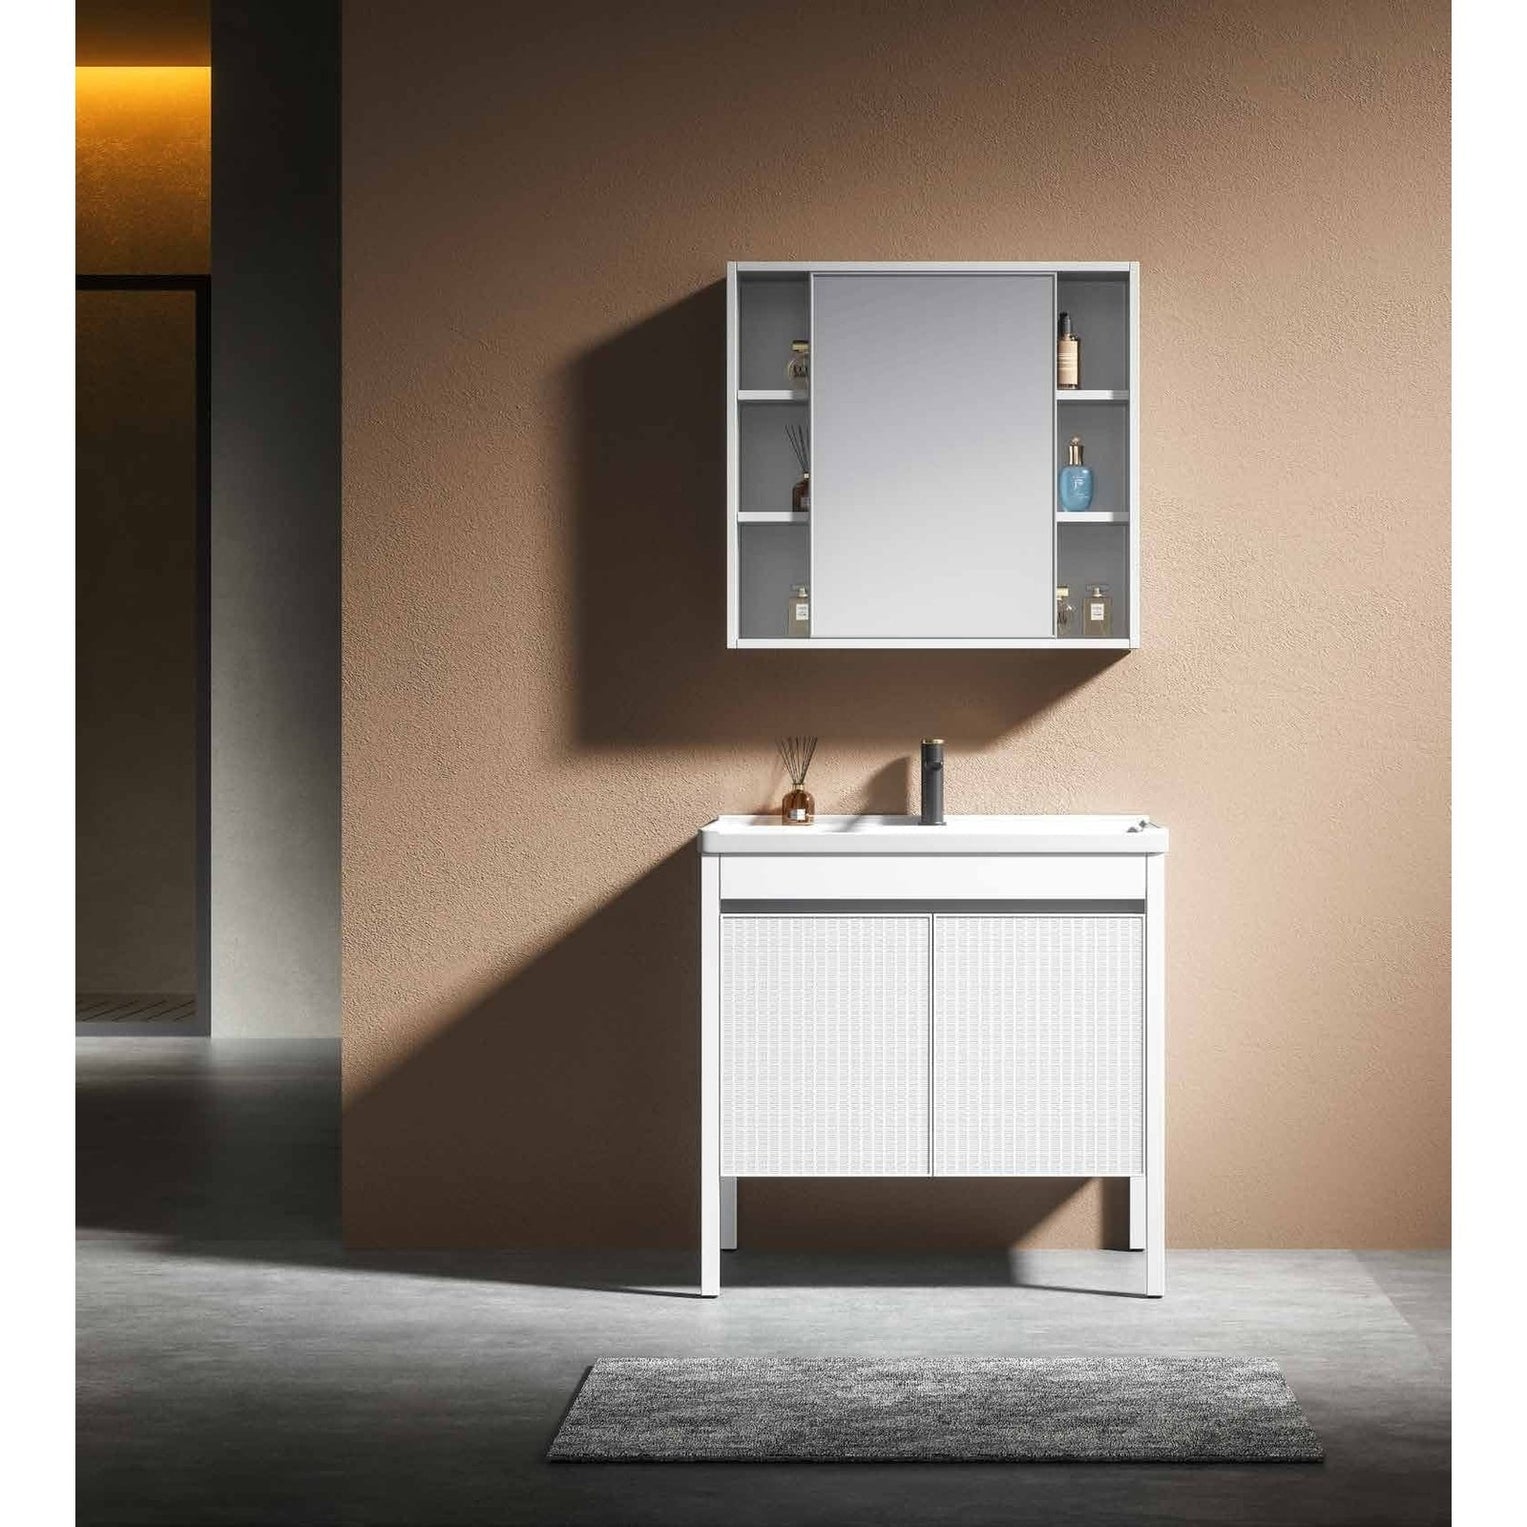 Buy Bathroom Luxury 60cm Wall-Mounted Vanity Cabinet with Mirror - WK-K-9920 | Shop at Supply Master Accra, Ghana Bathroom Vanity & Cabinets Buy Tools hardware Building materials